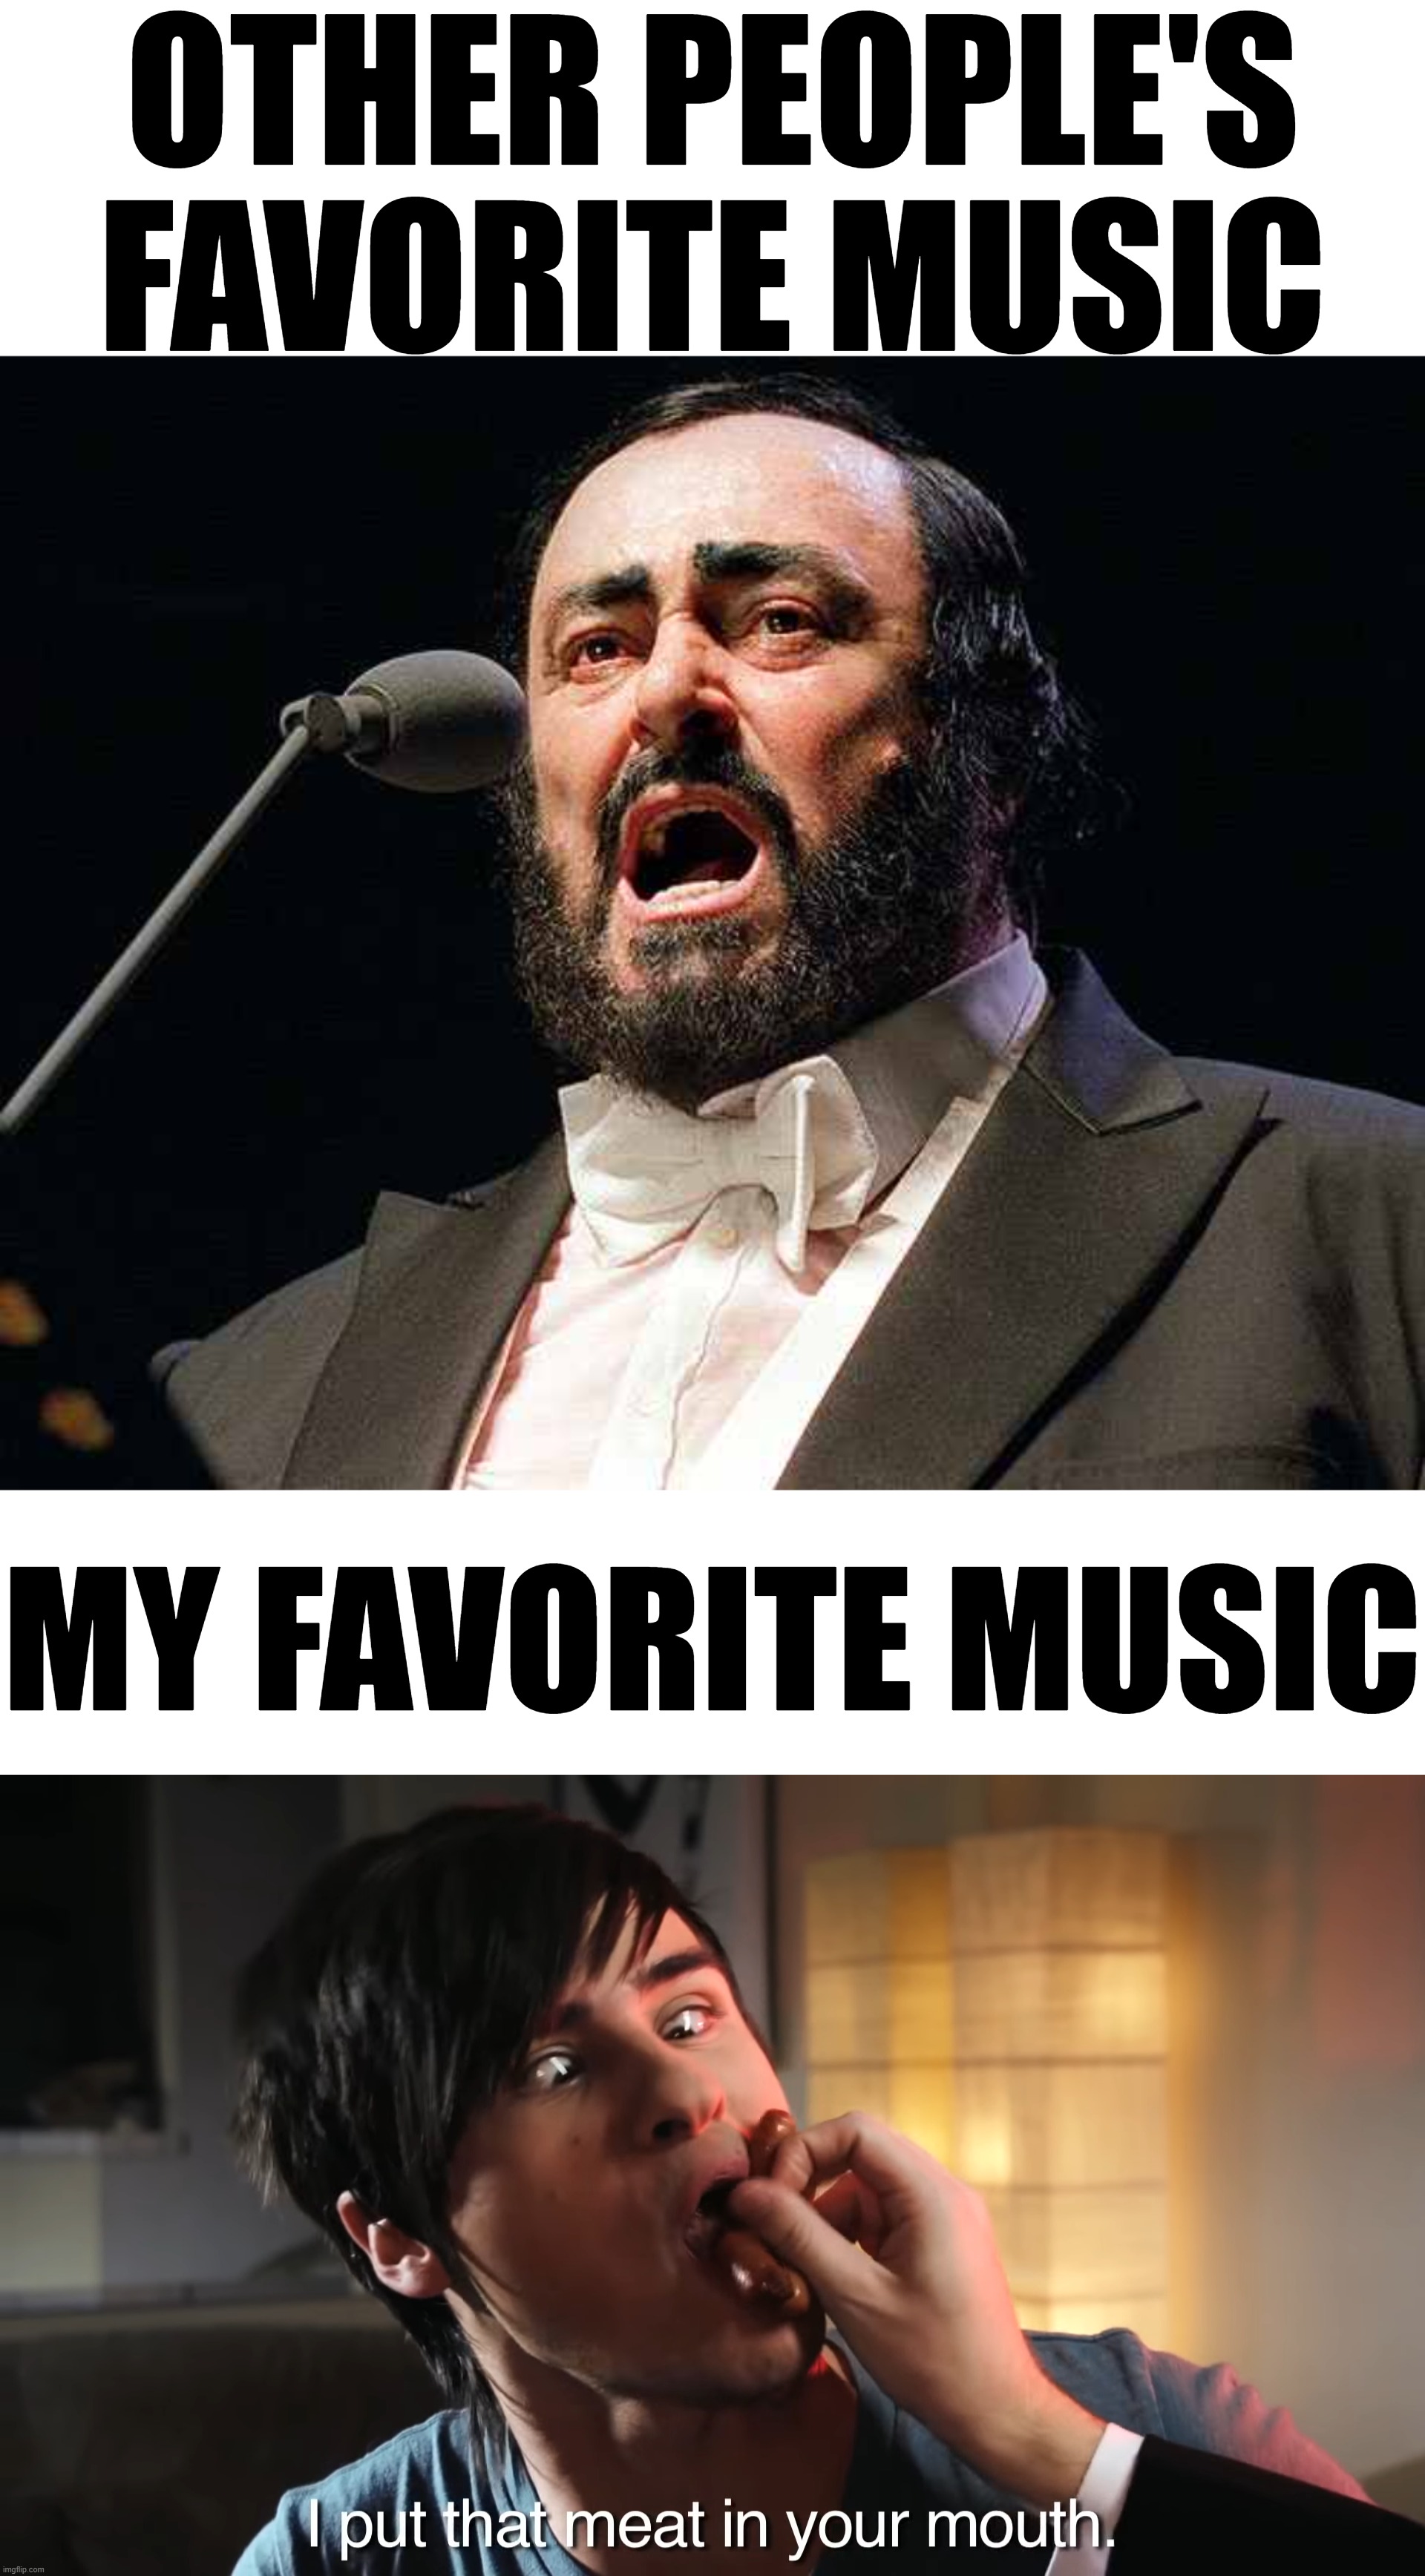 OTHER PEOPLE'S FAVORITE MUSIC; MY FAVORITE MUSIC | image tagged in memes,blank transparent square,pavarotti opera tenor | made w/ Imgflip meme maker